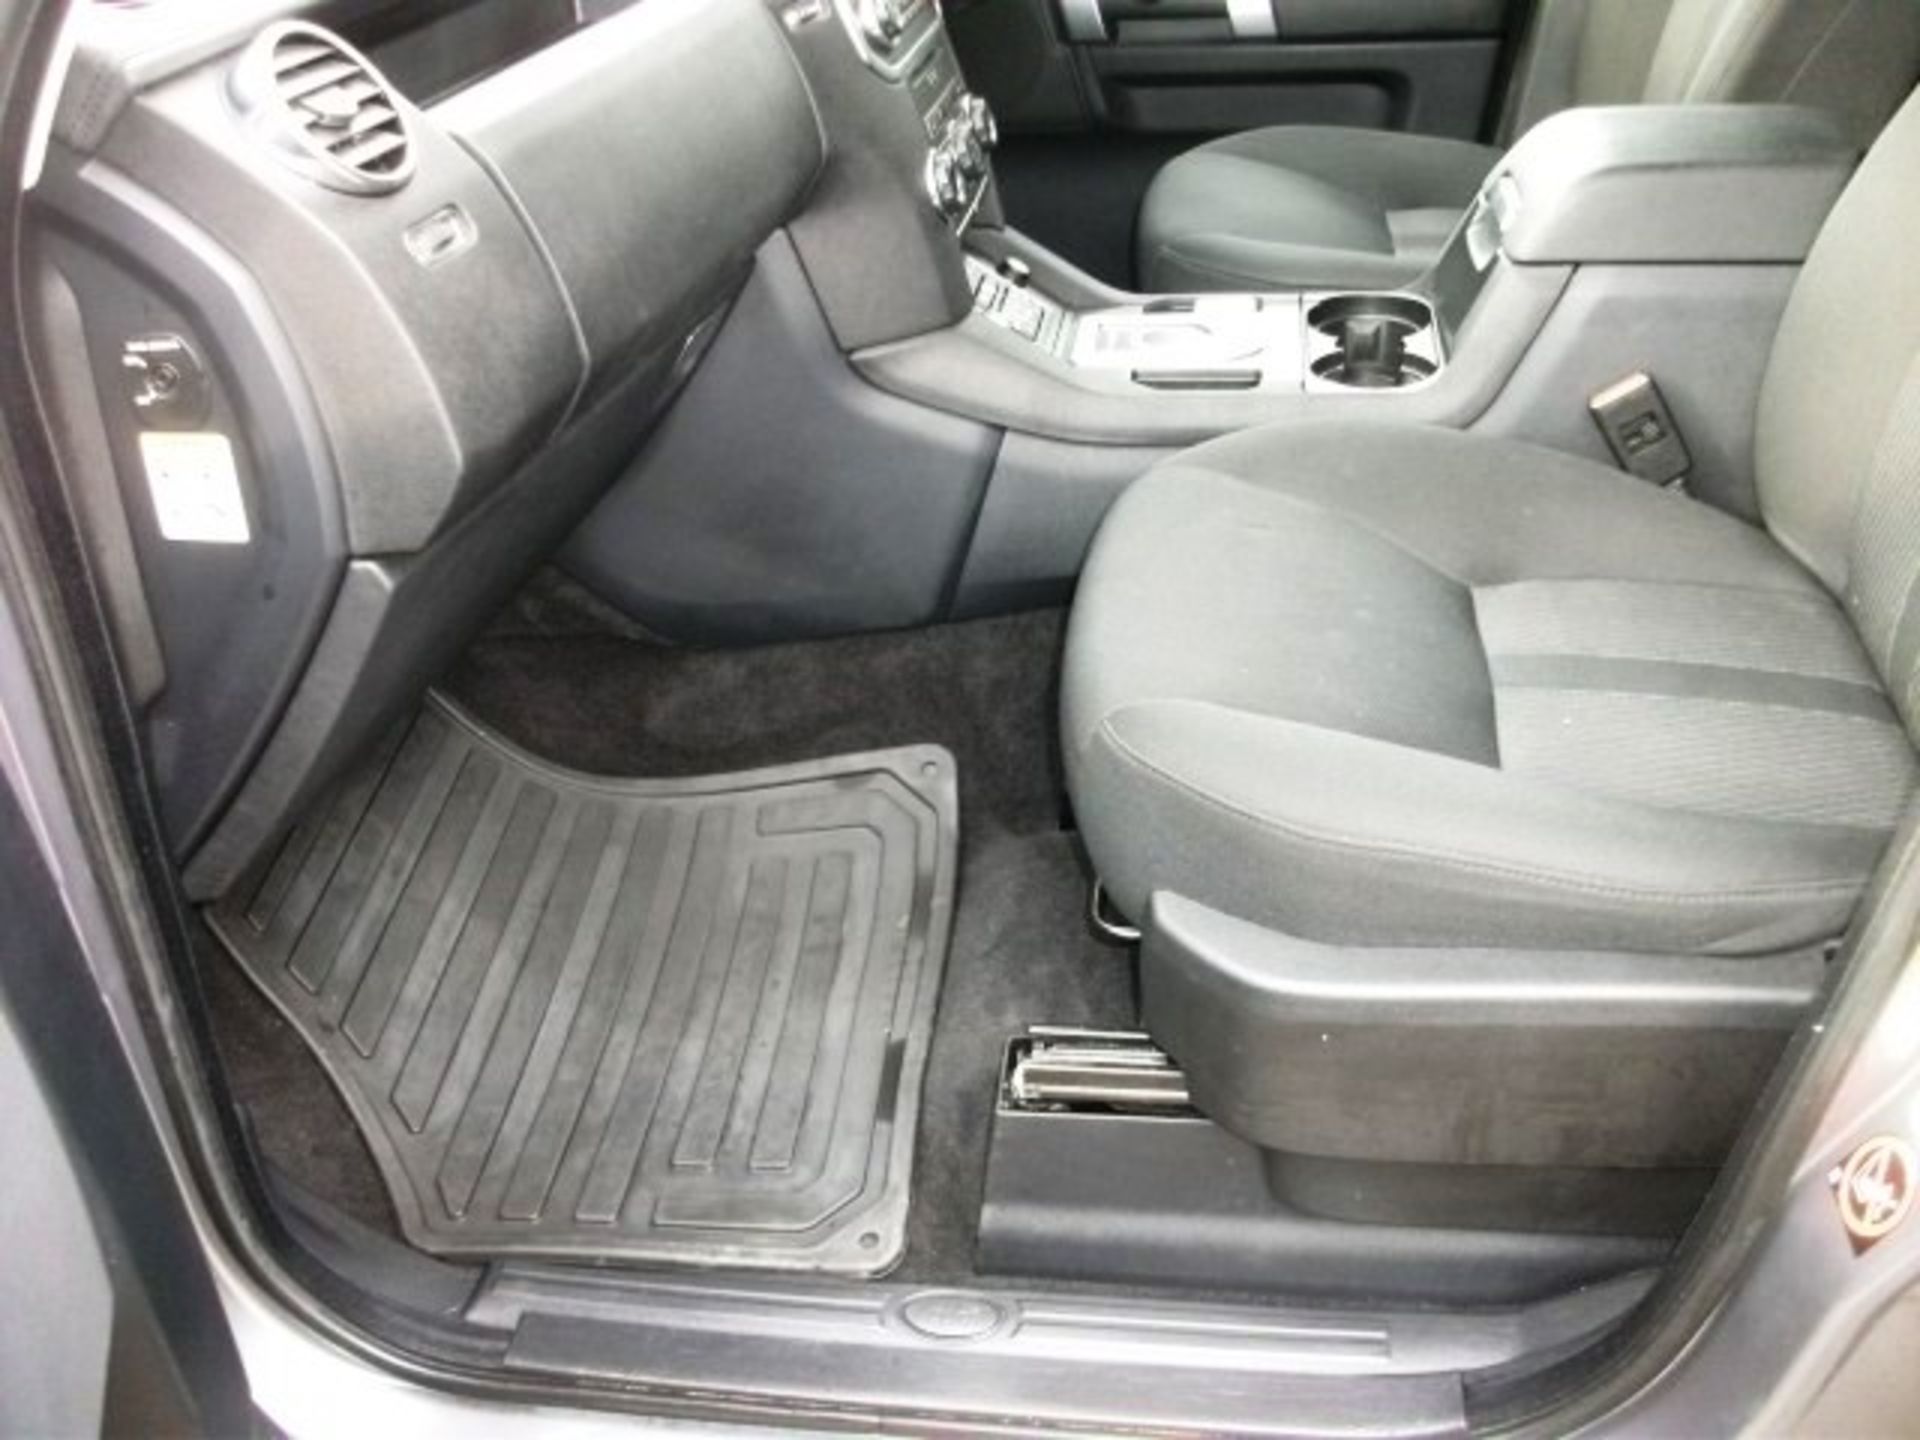 LAND ROVER DISCOVERY SDV6 AUTO 255 - 2993cc
Body: 4 Dr 4x4
Color: Grey
First Reg: 26/04/2013 - Image 18 of 29